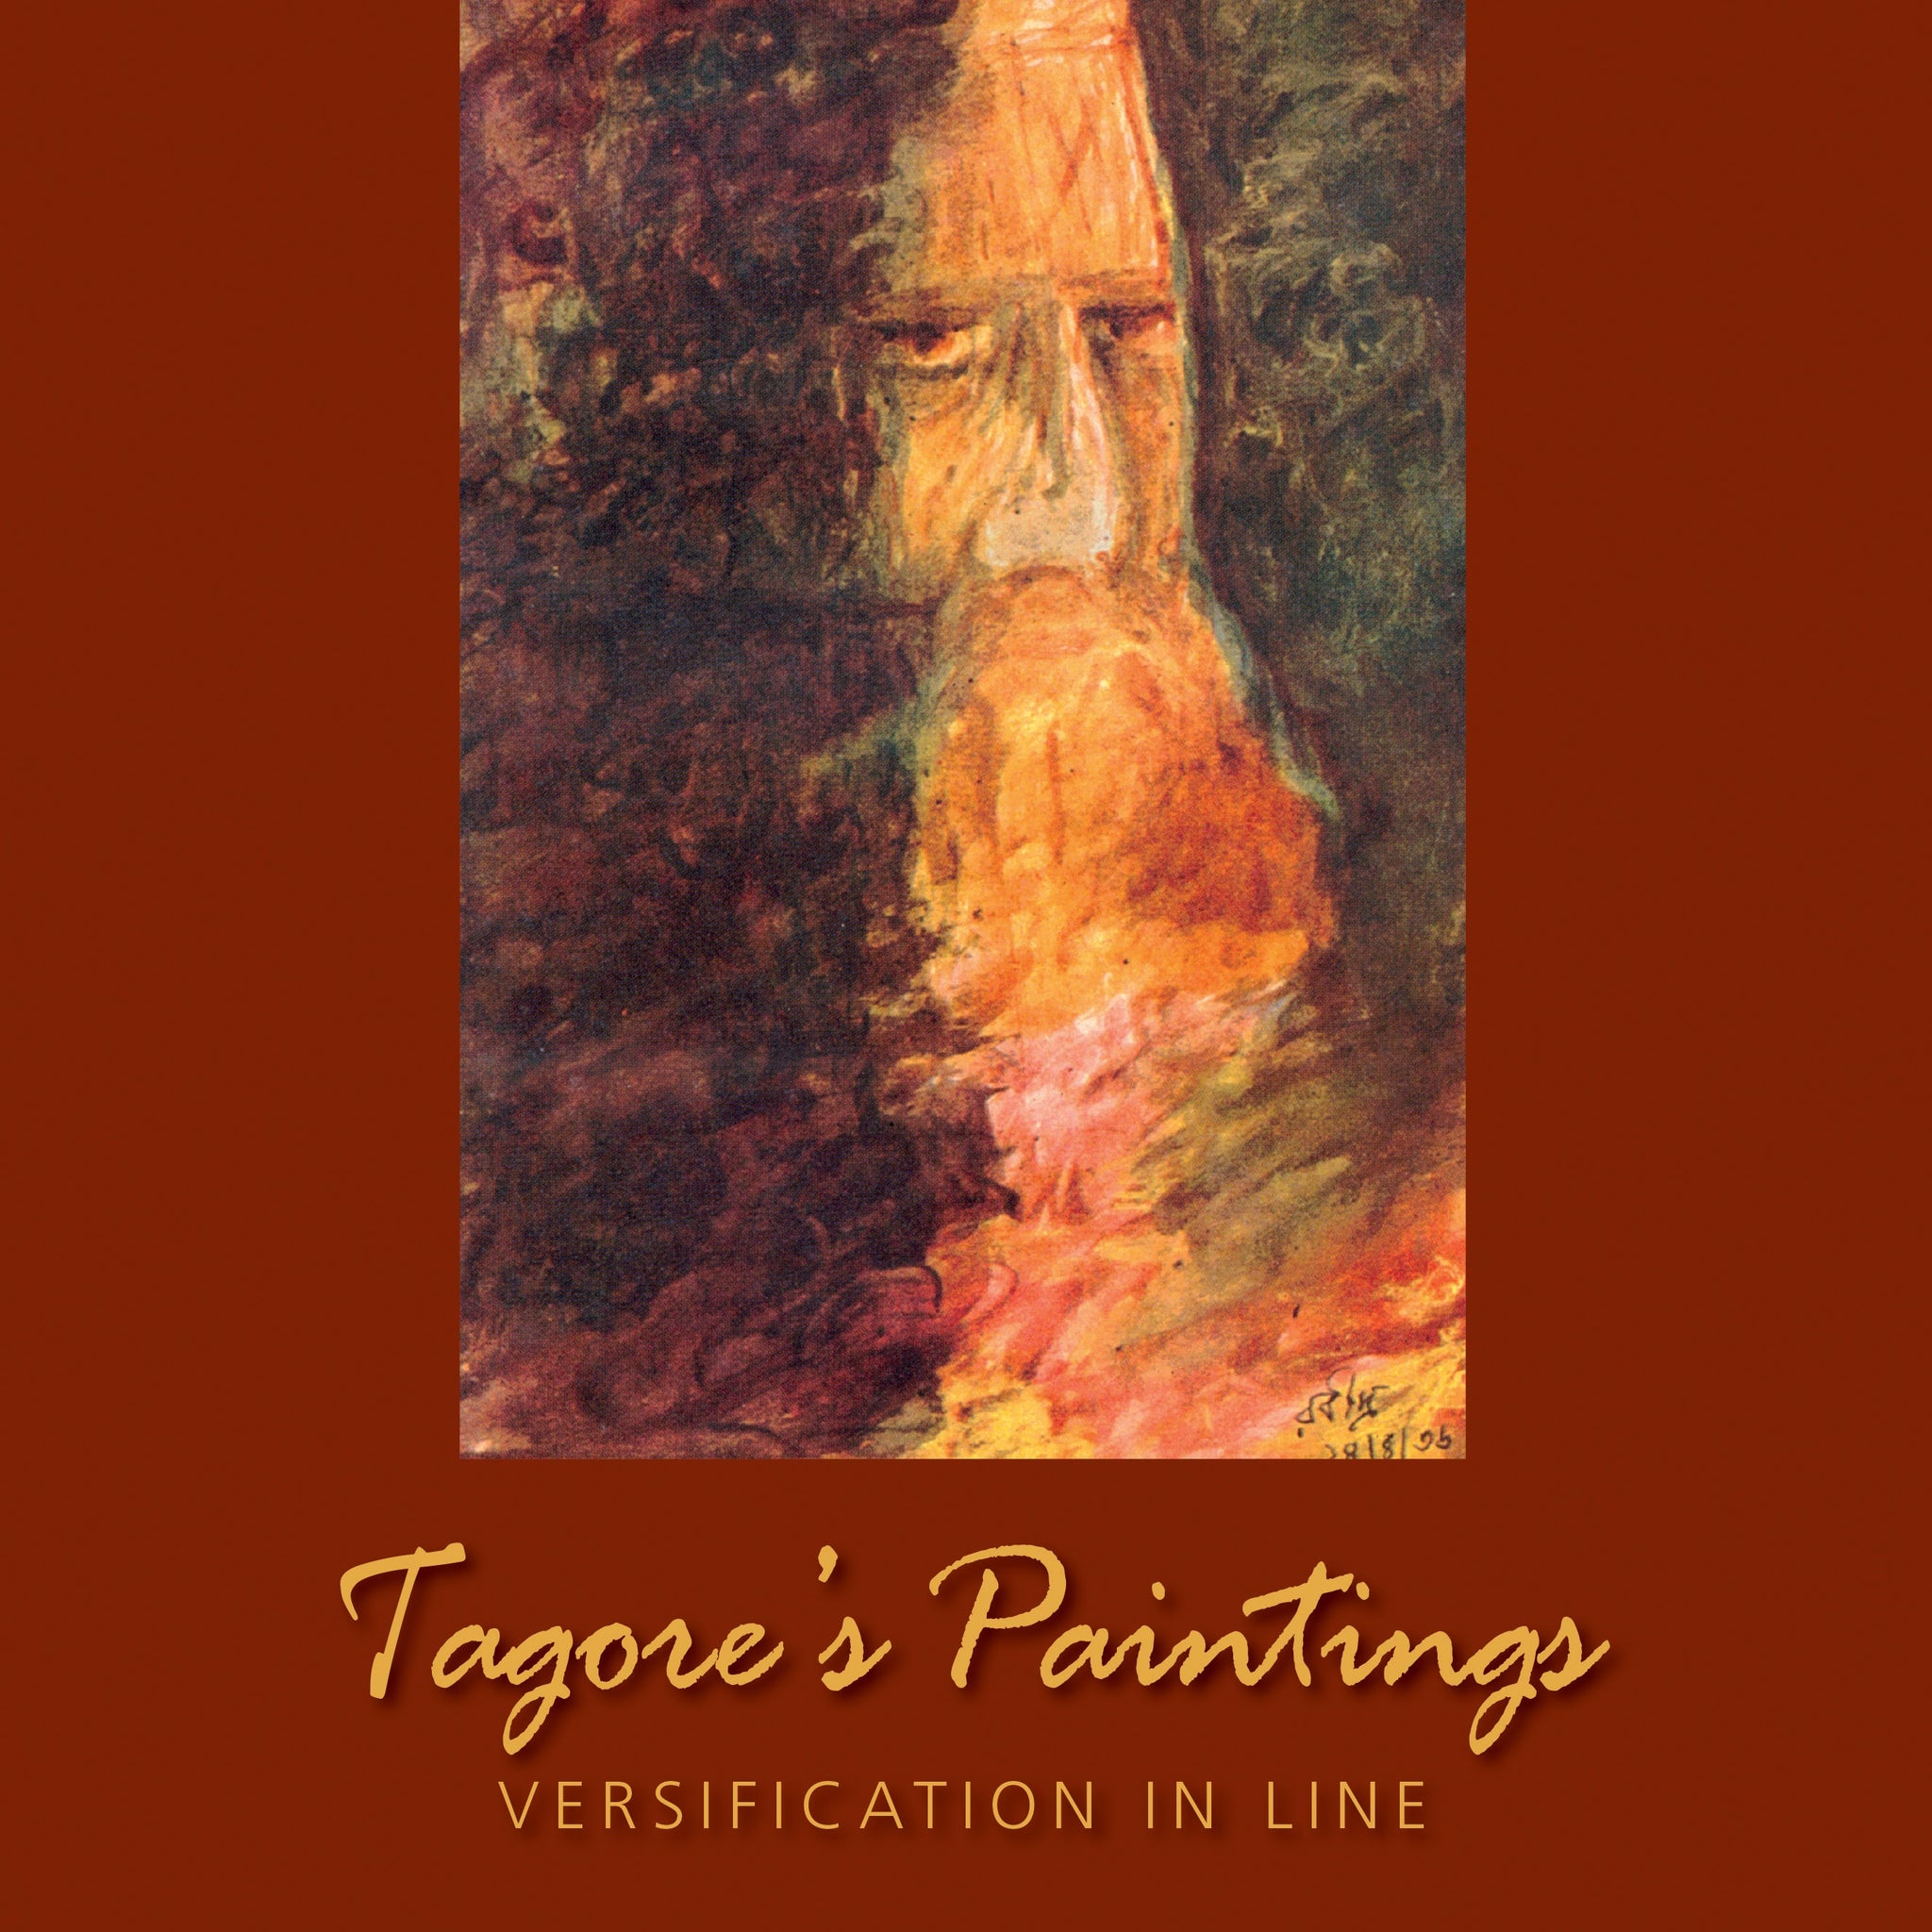 Tagore's Paintings: Versification in Line